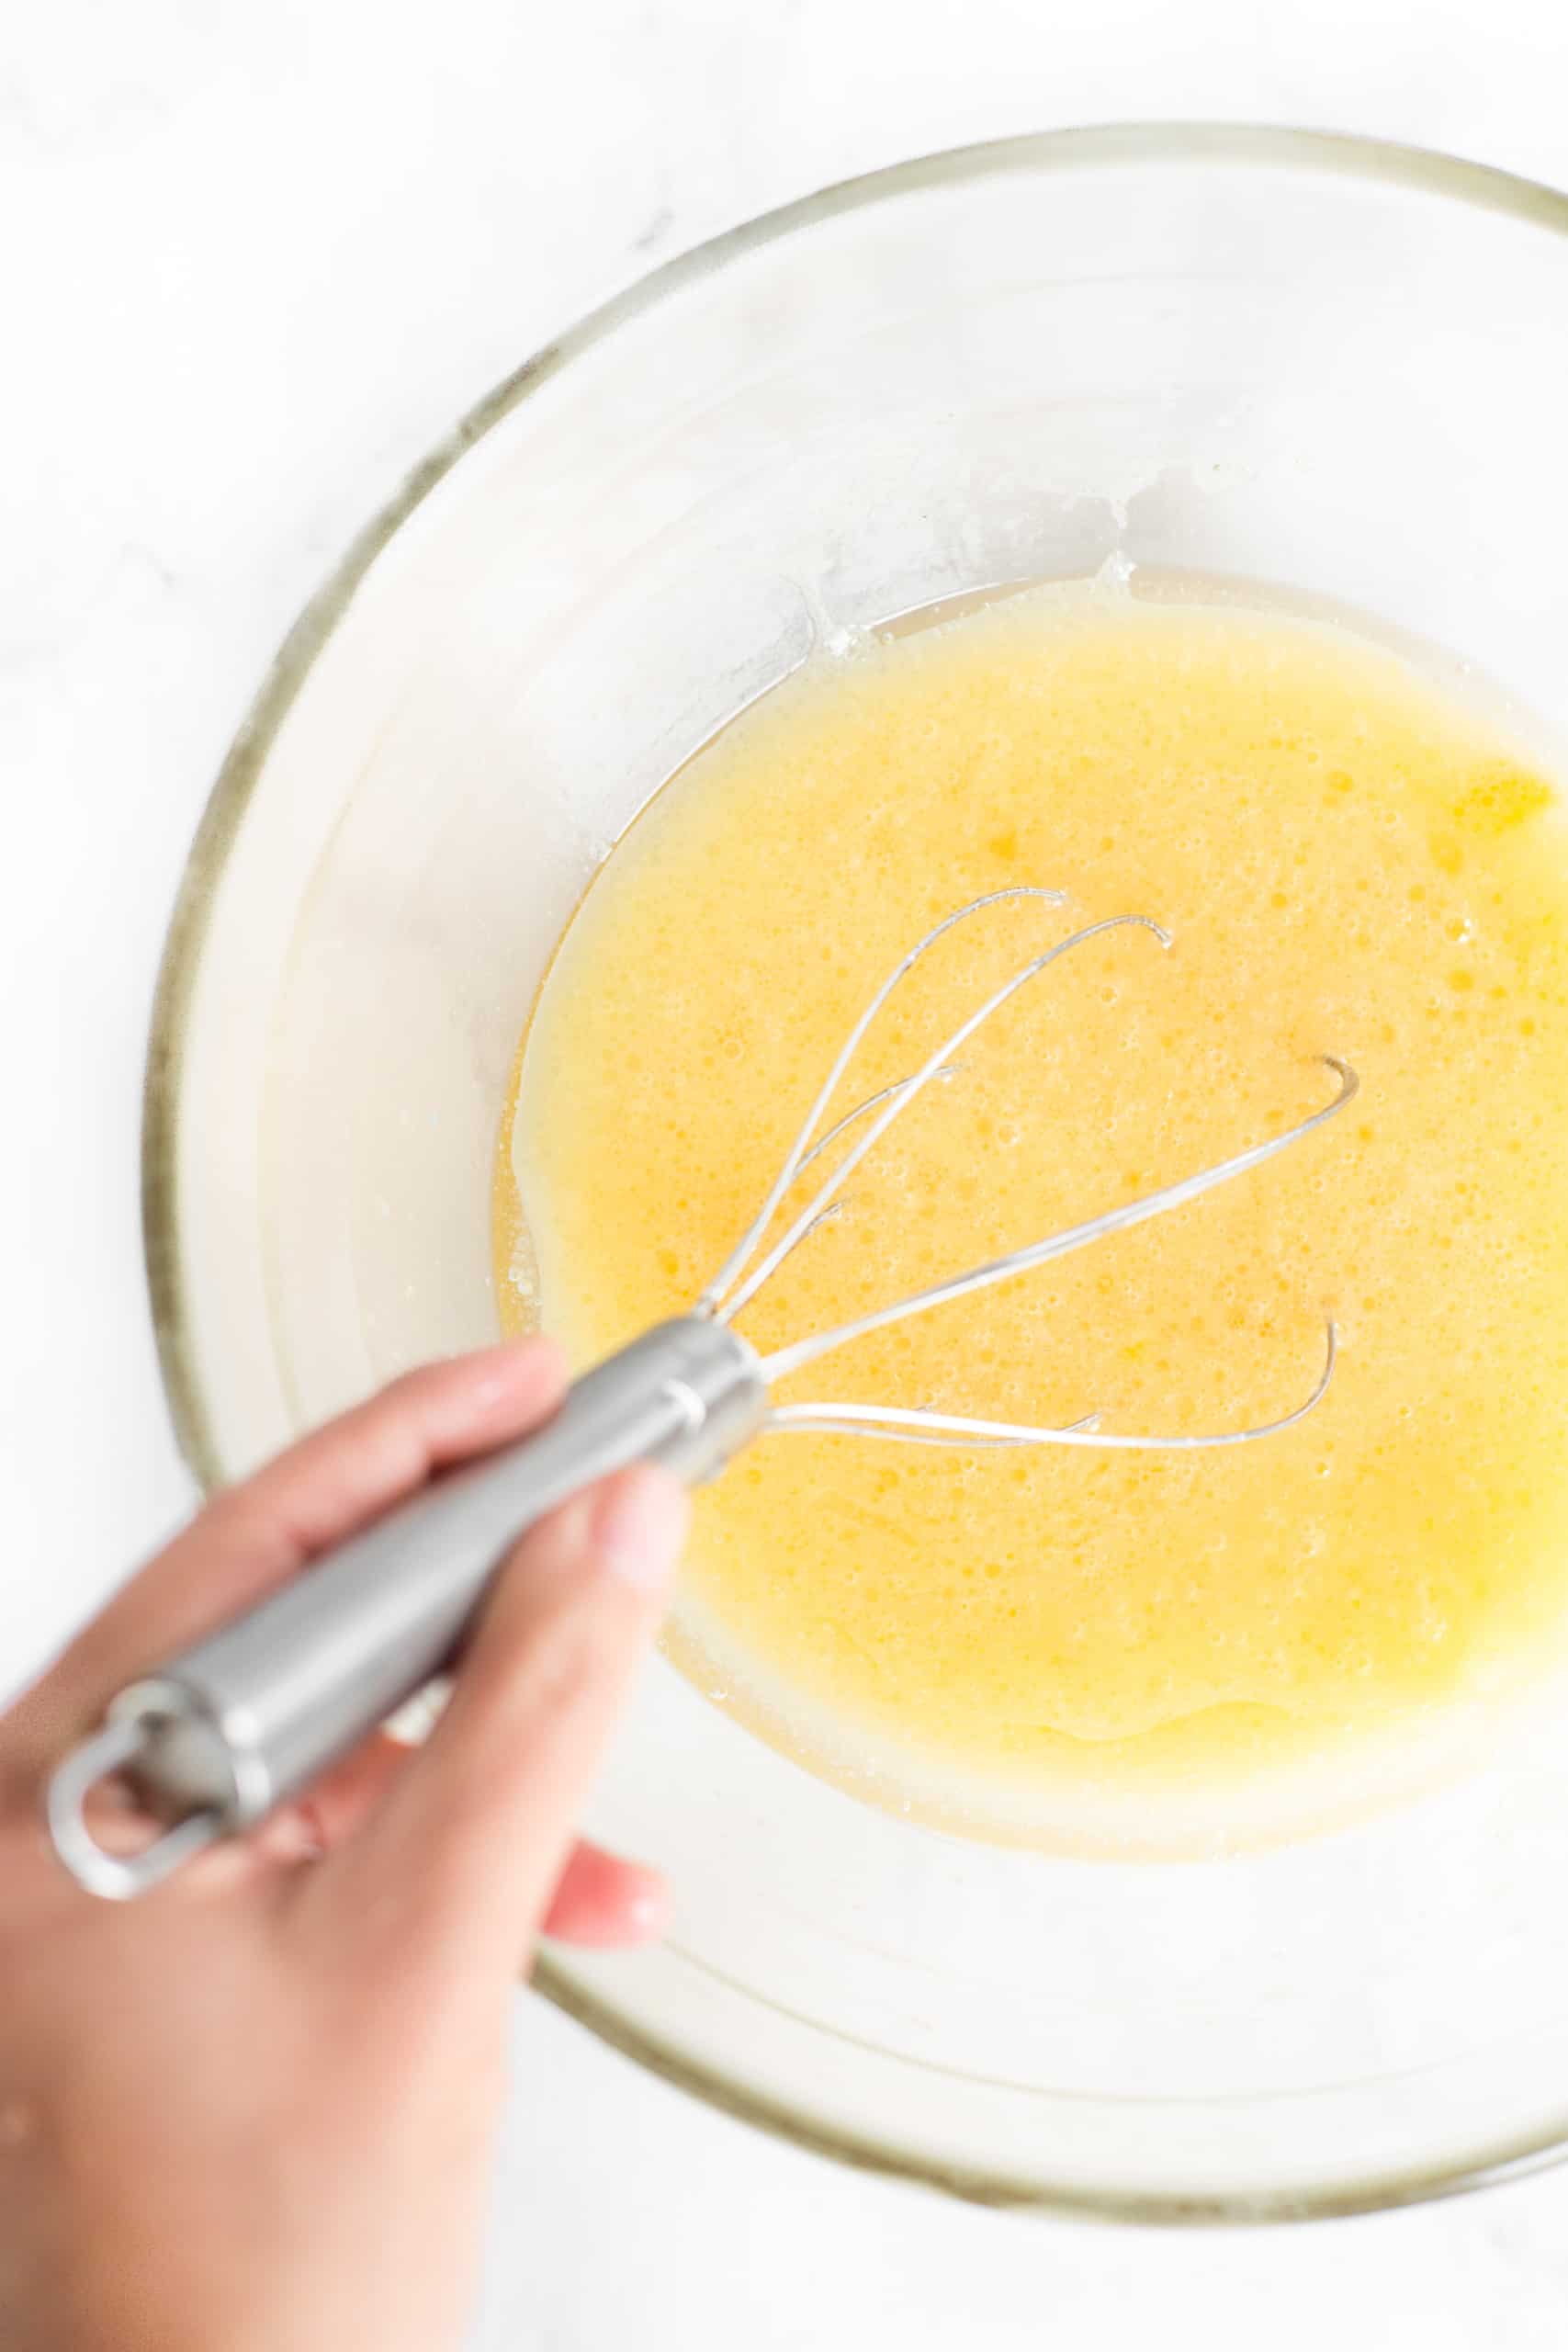 Whisking yellow egg mixture in a glass bowl.